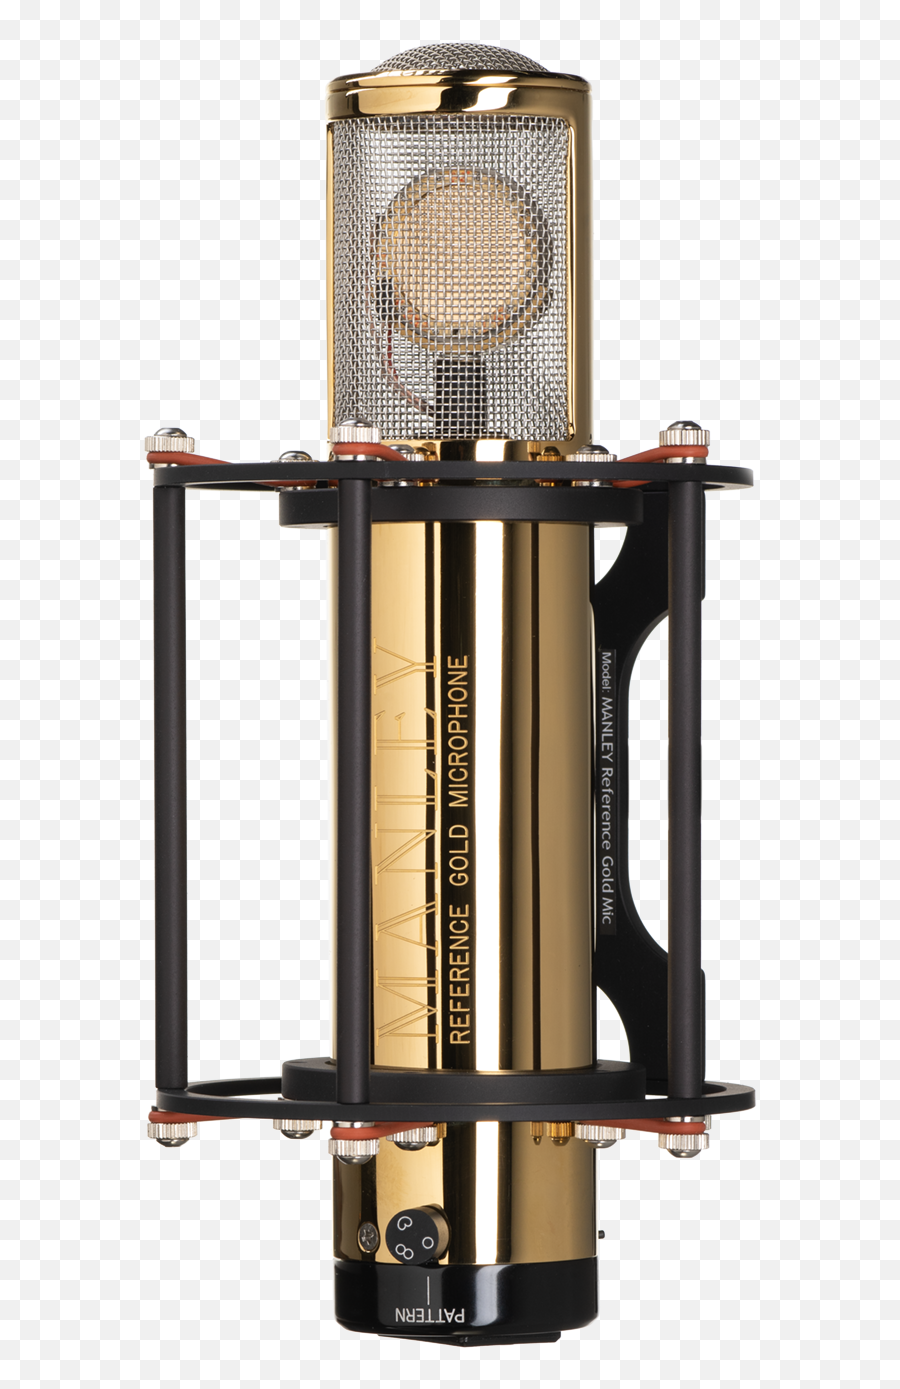 Manley Reference Gold Tube Microphone U2014 Manley Laboratories - Manley Microphone Gold Emoji,Microfono Png